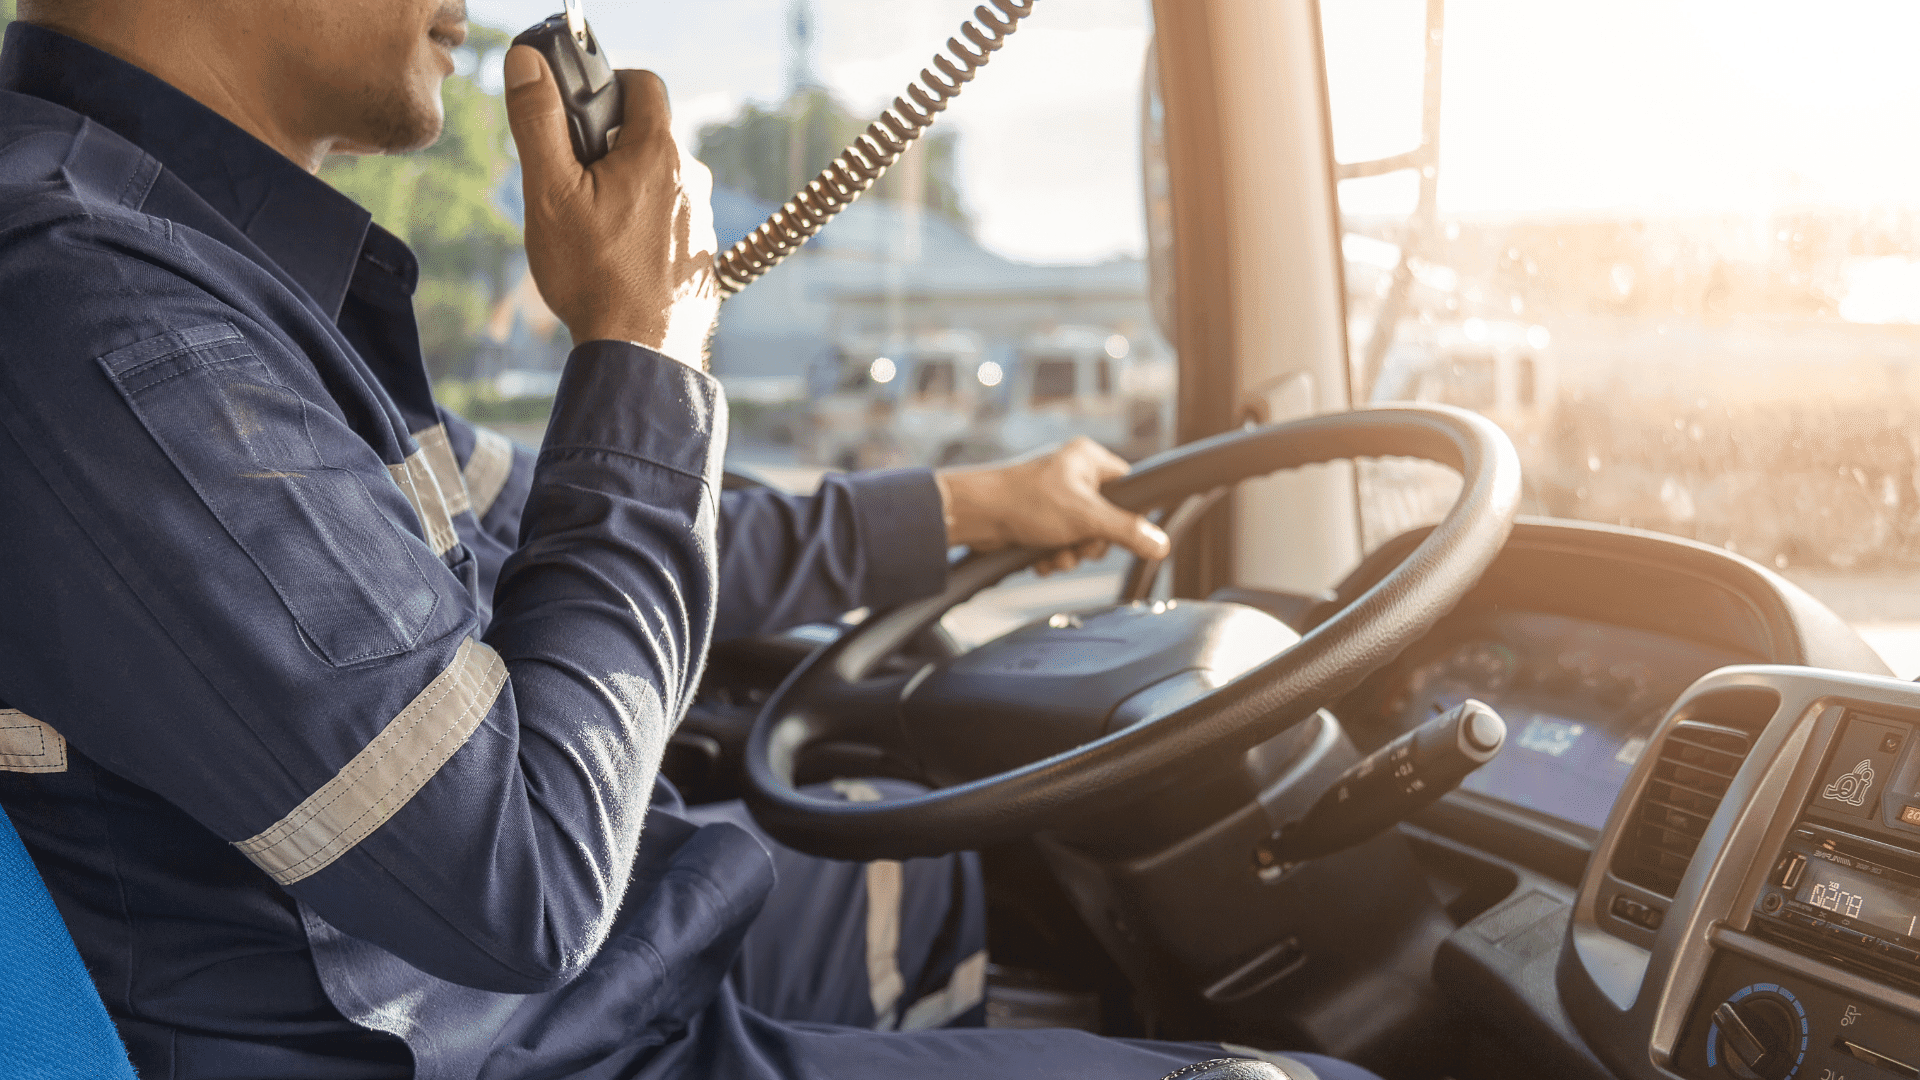 Truck driving essentials: top 10 must haves